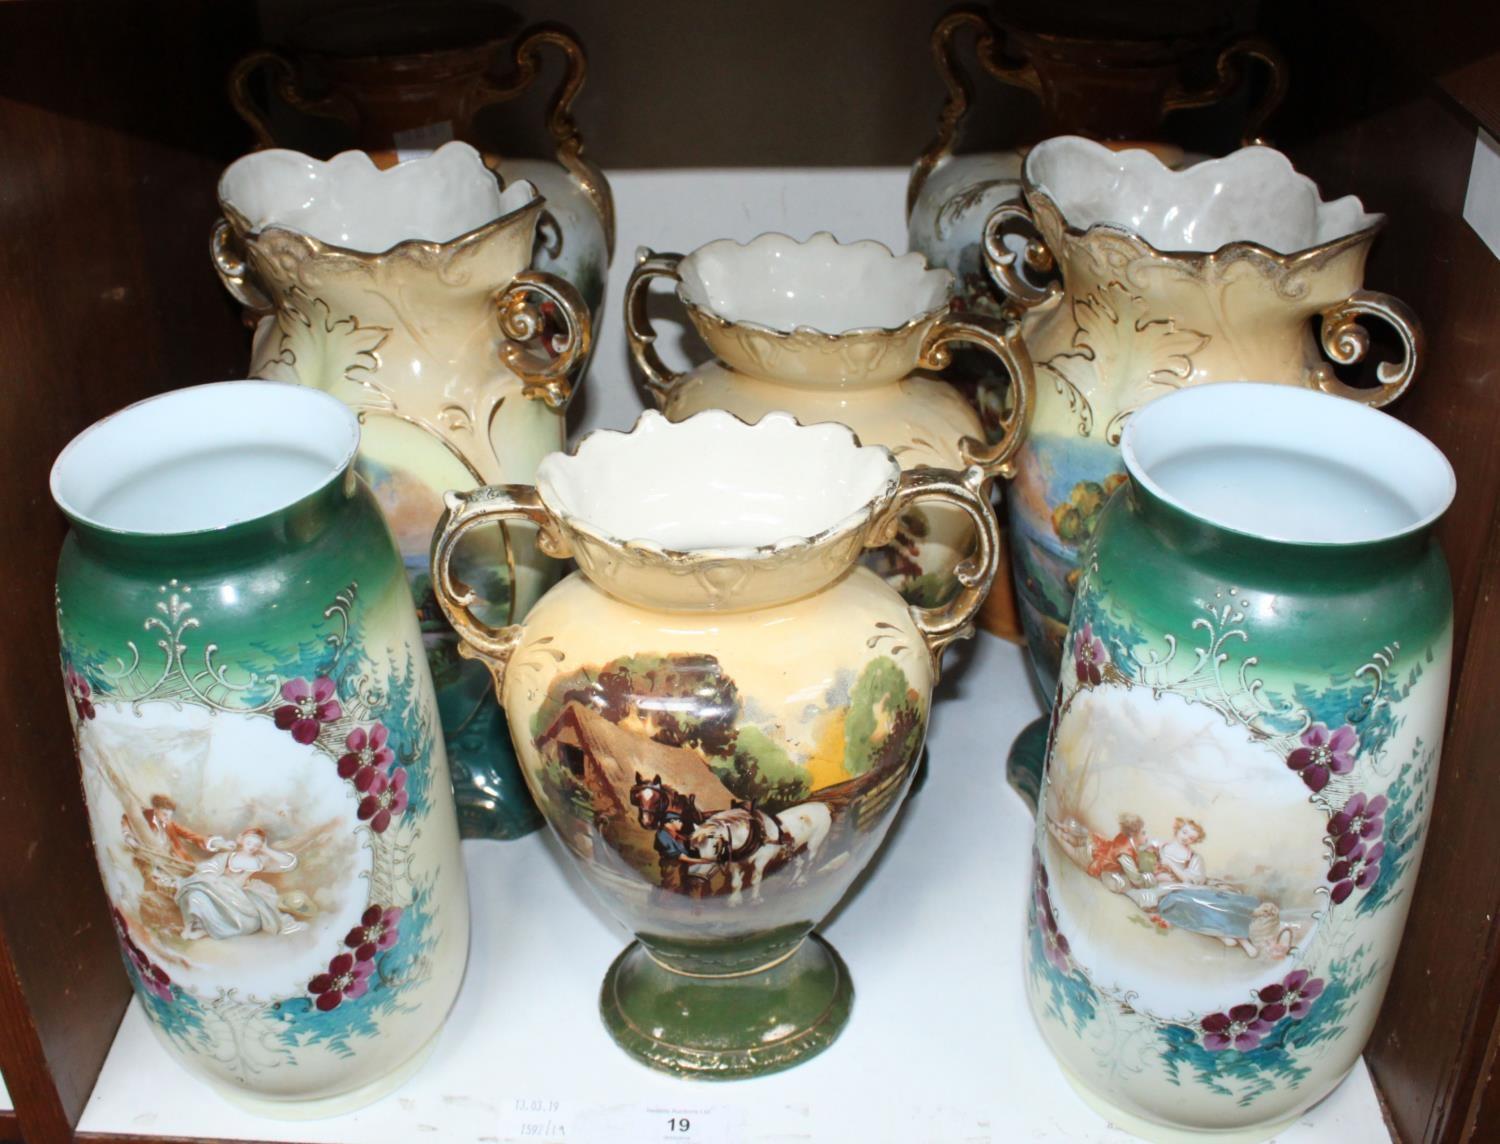 SECTION 19. Three pairs of Victorian pottery vases painted with various countryside scenes and a